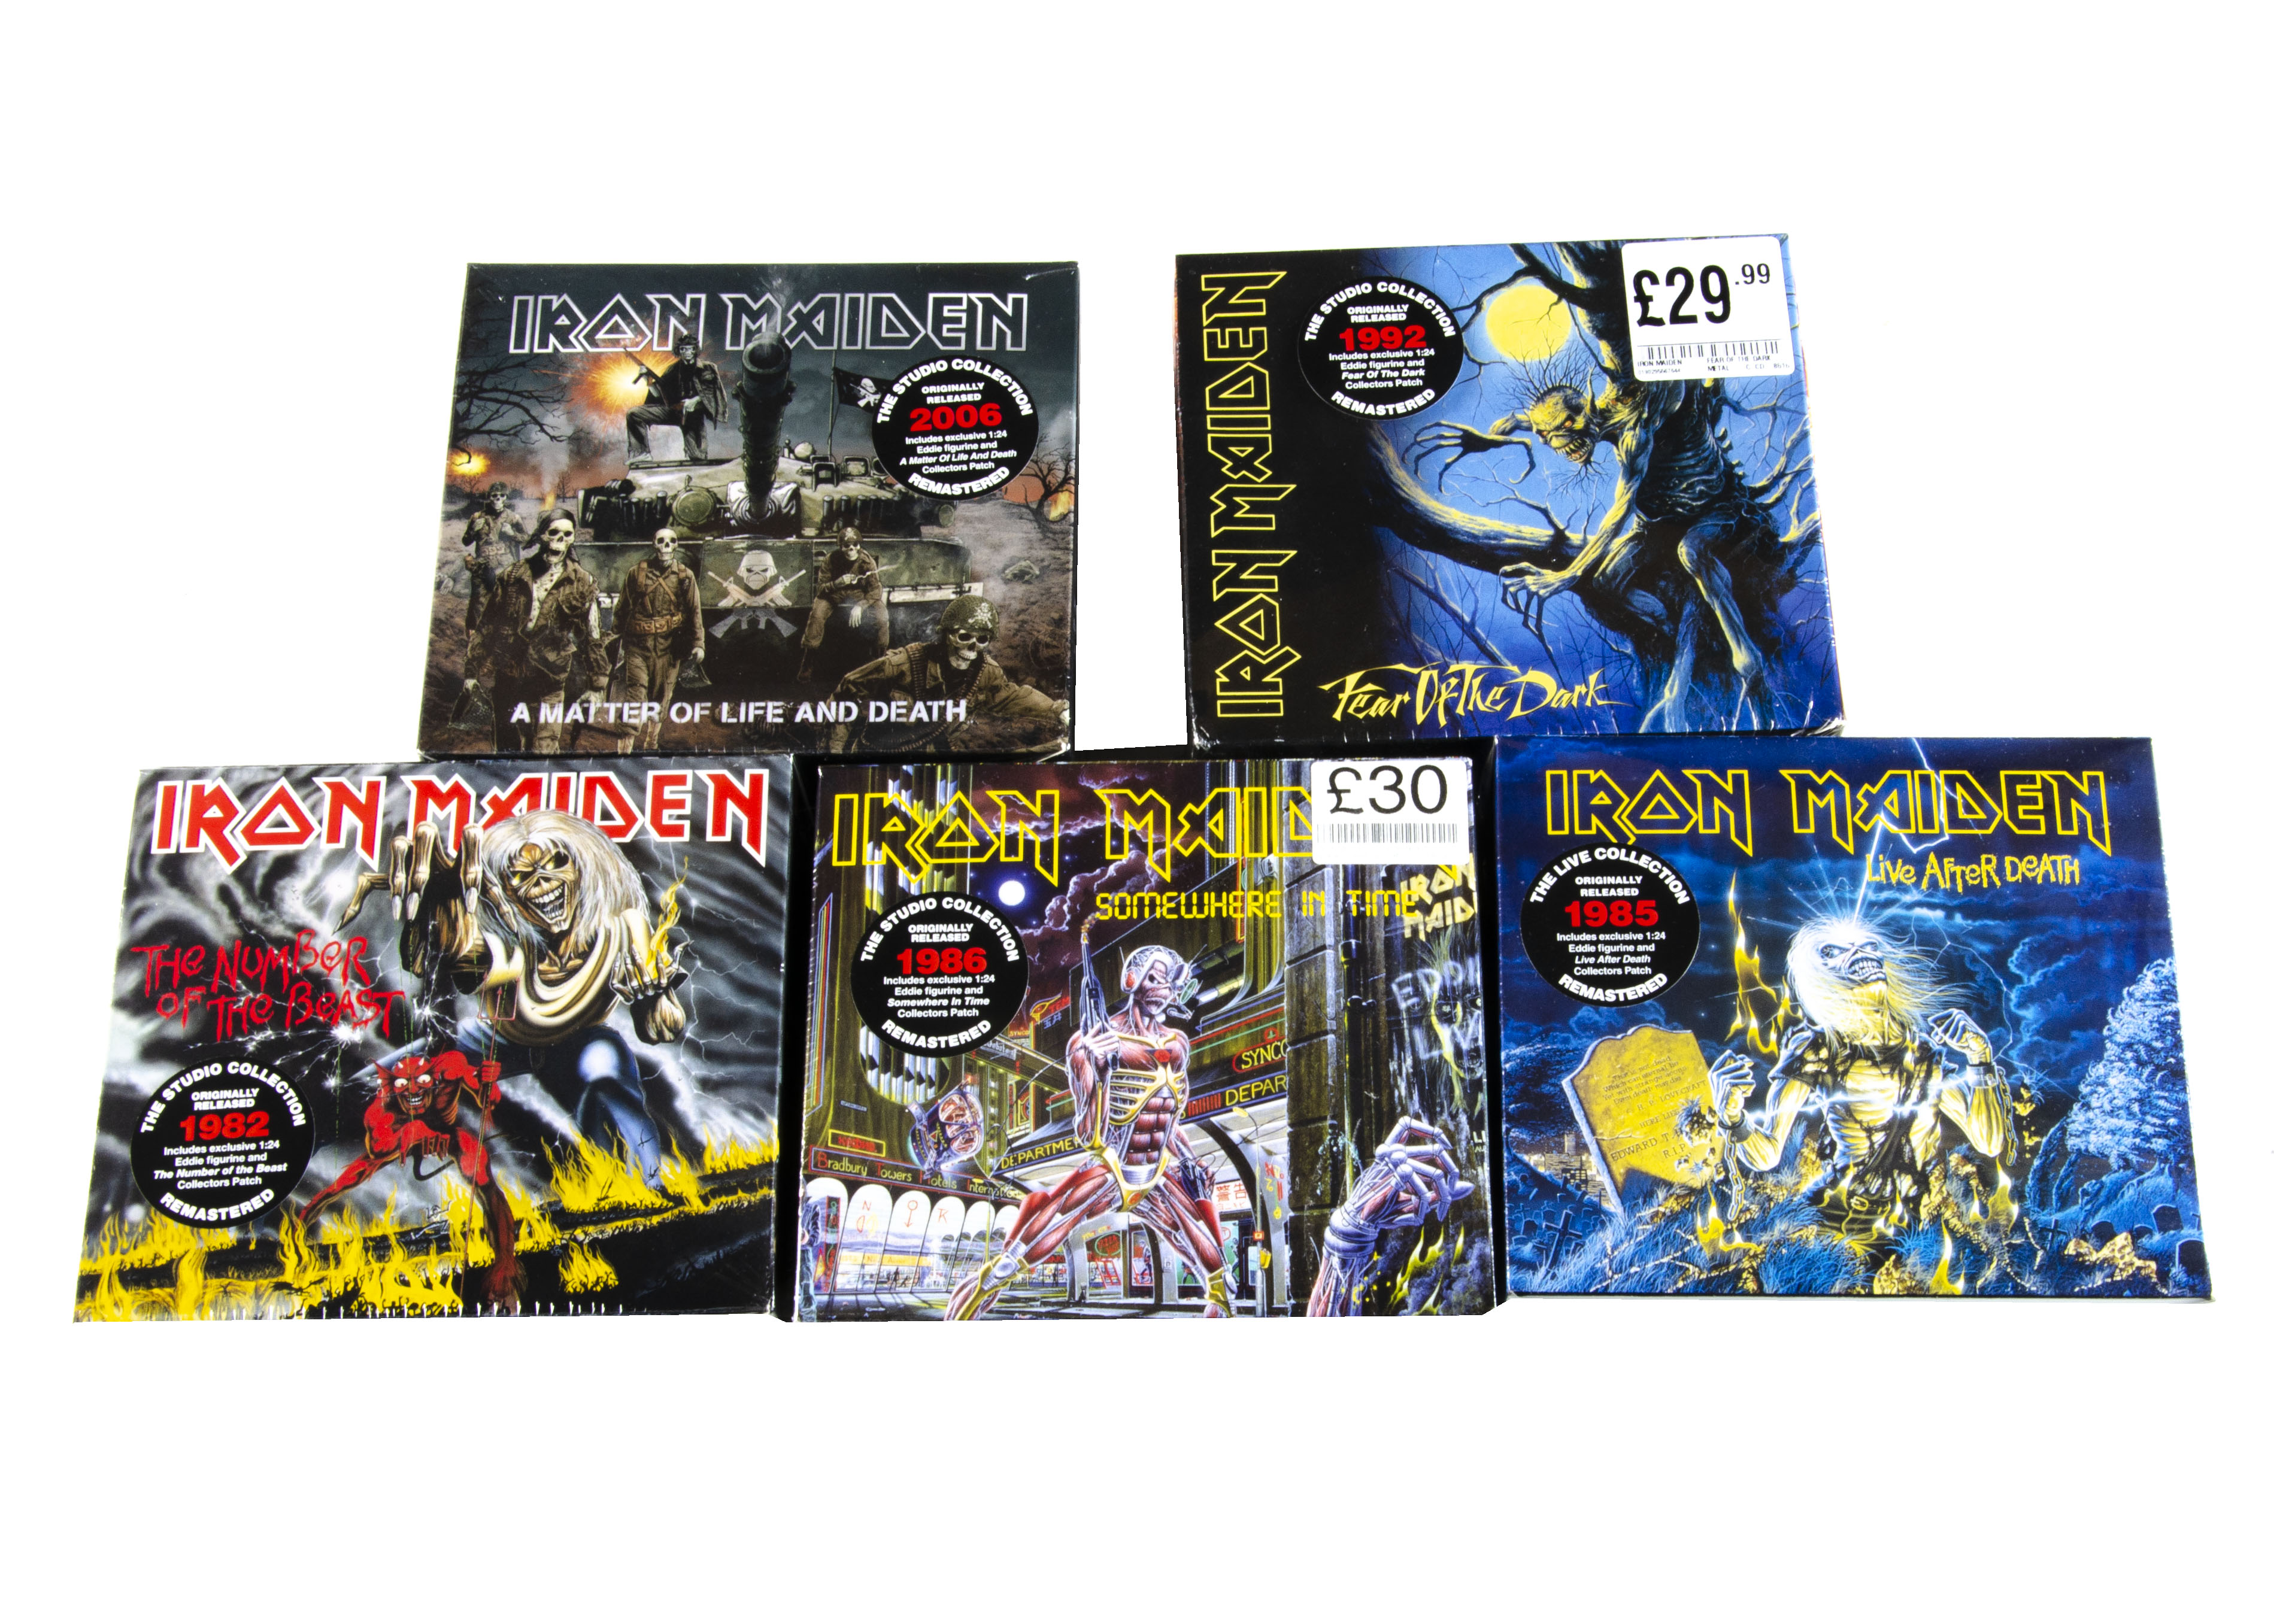 Iron Maiden CD Box Sets, five Sealed CD Album Box Sets, all from the 2015 Remaster Collection, all